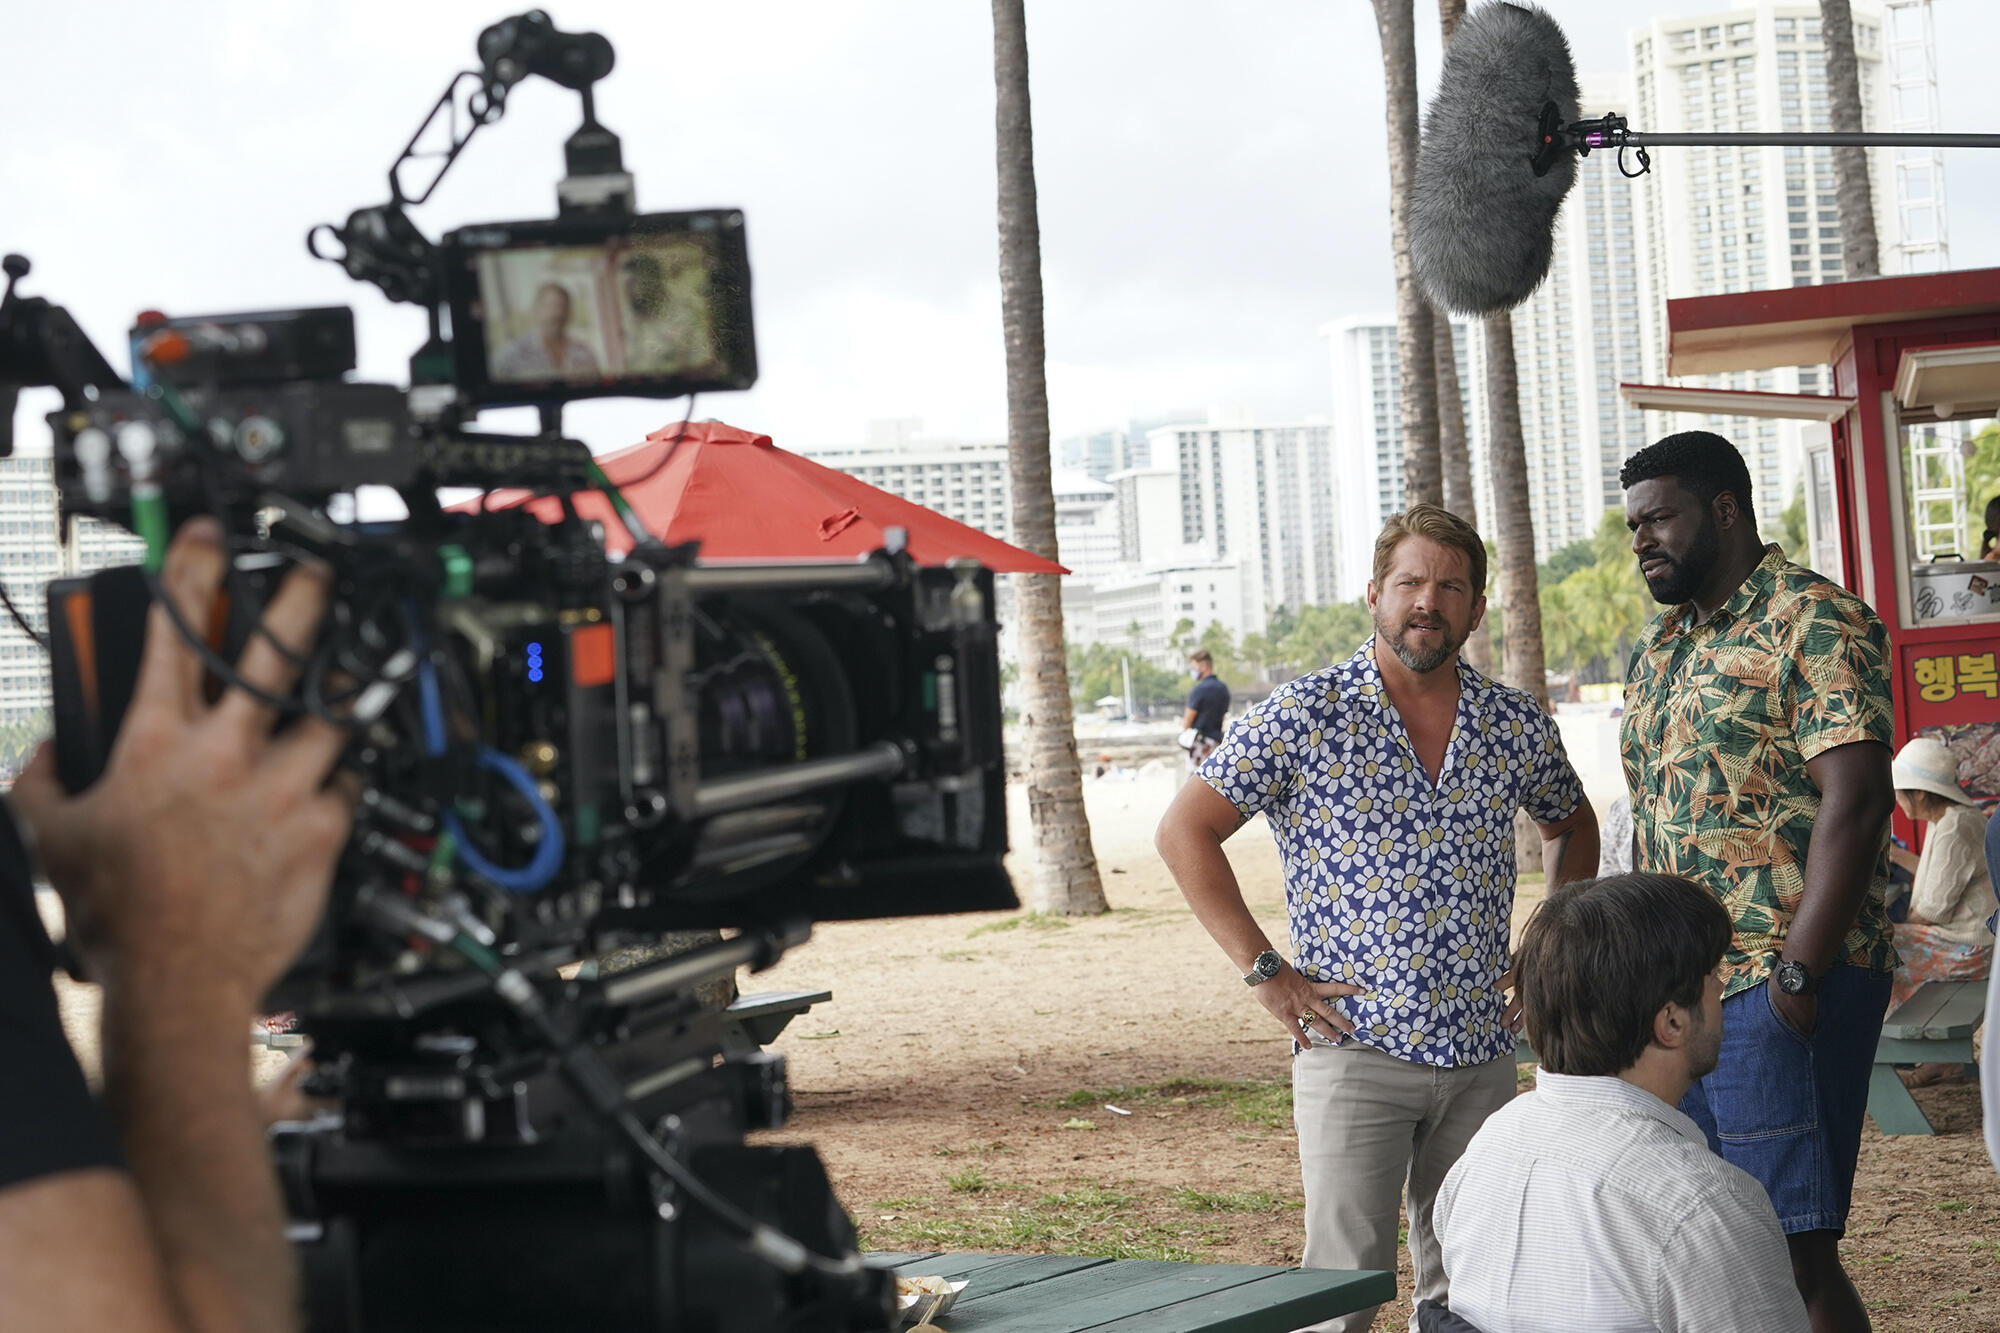 Zachary Knighton, left, and Stephen Hill on the set of Magnum P.I.